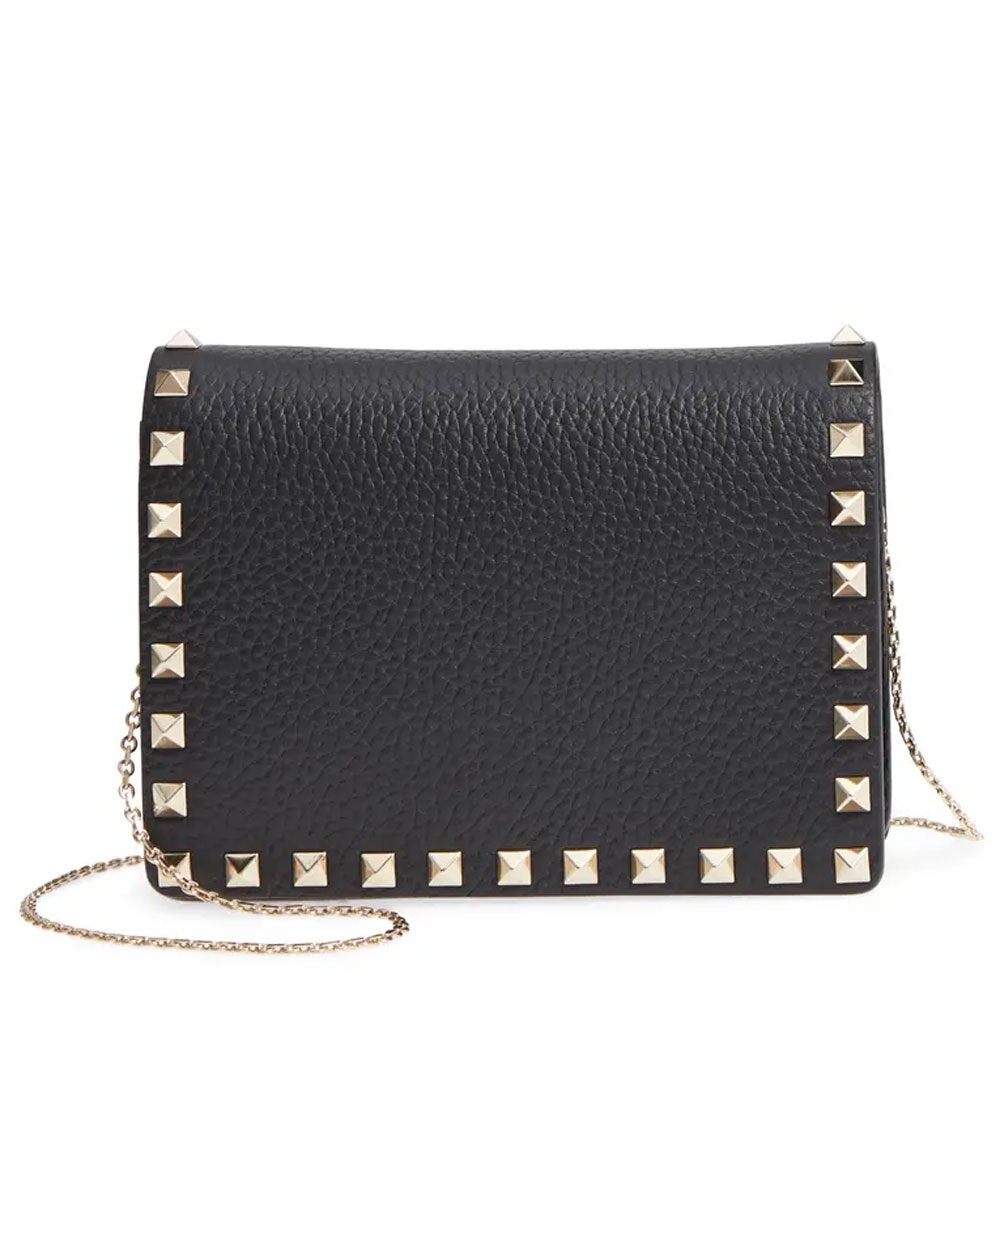 Nero Pouch with Rockstuds and Chain